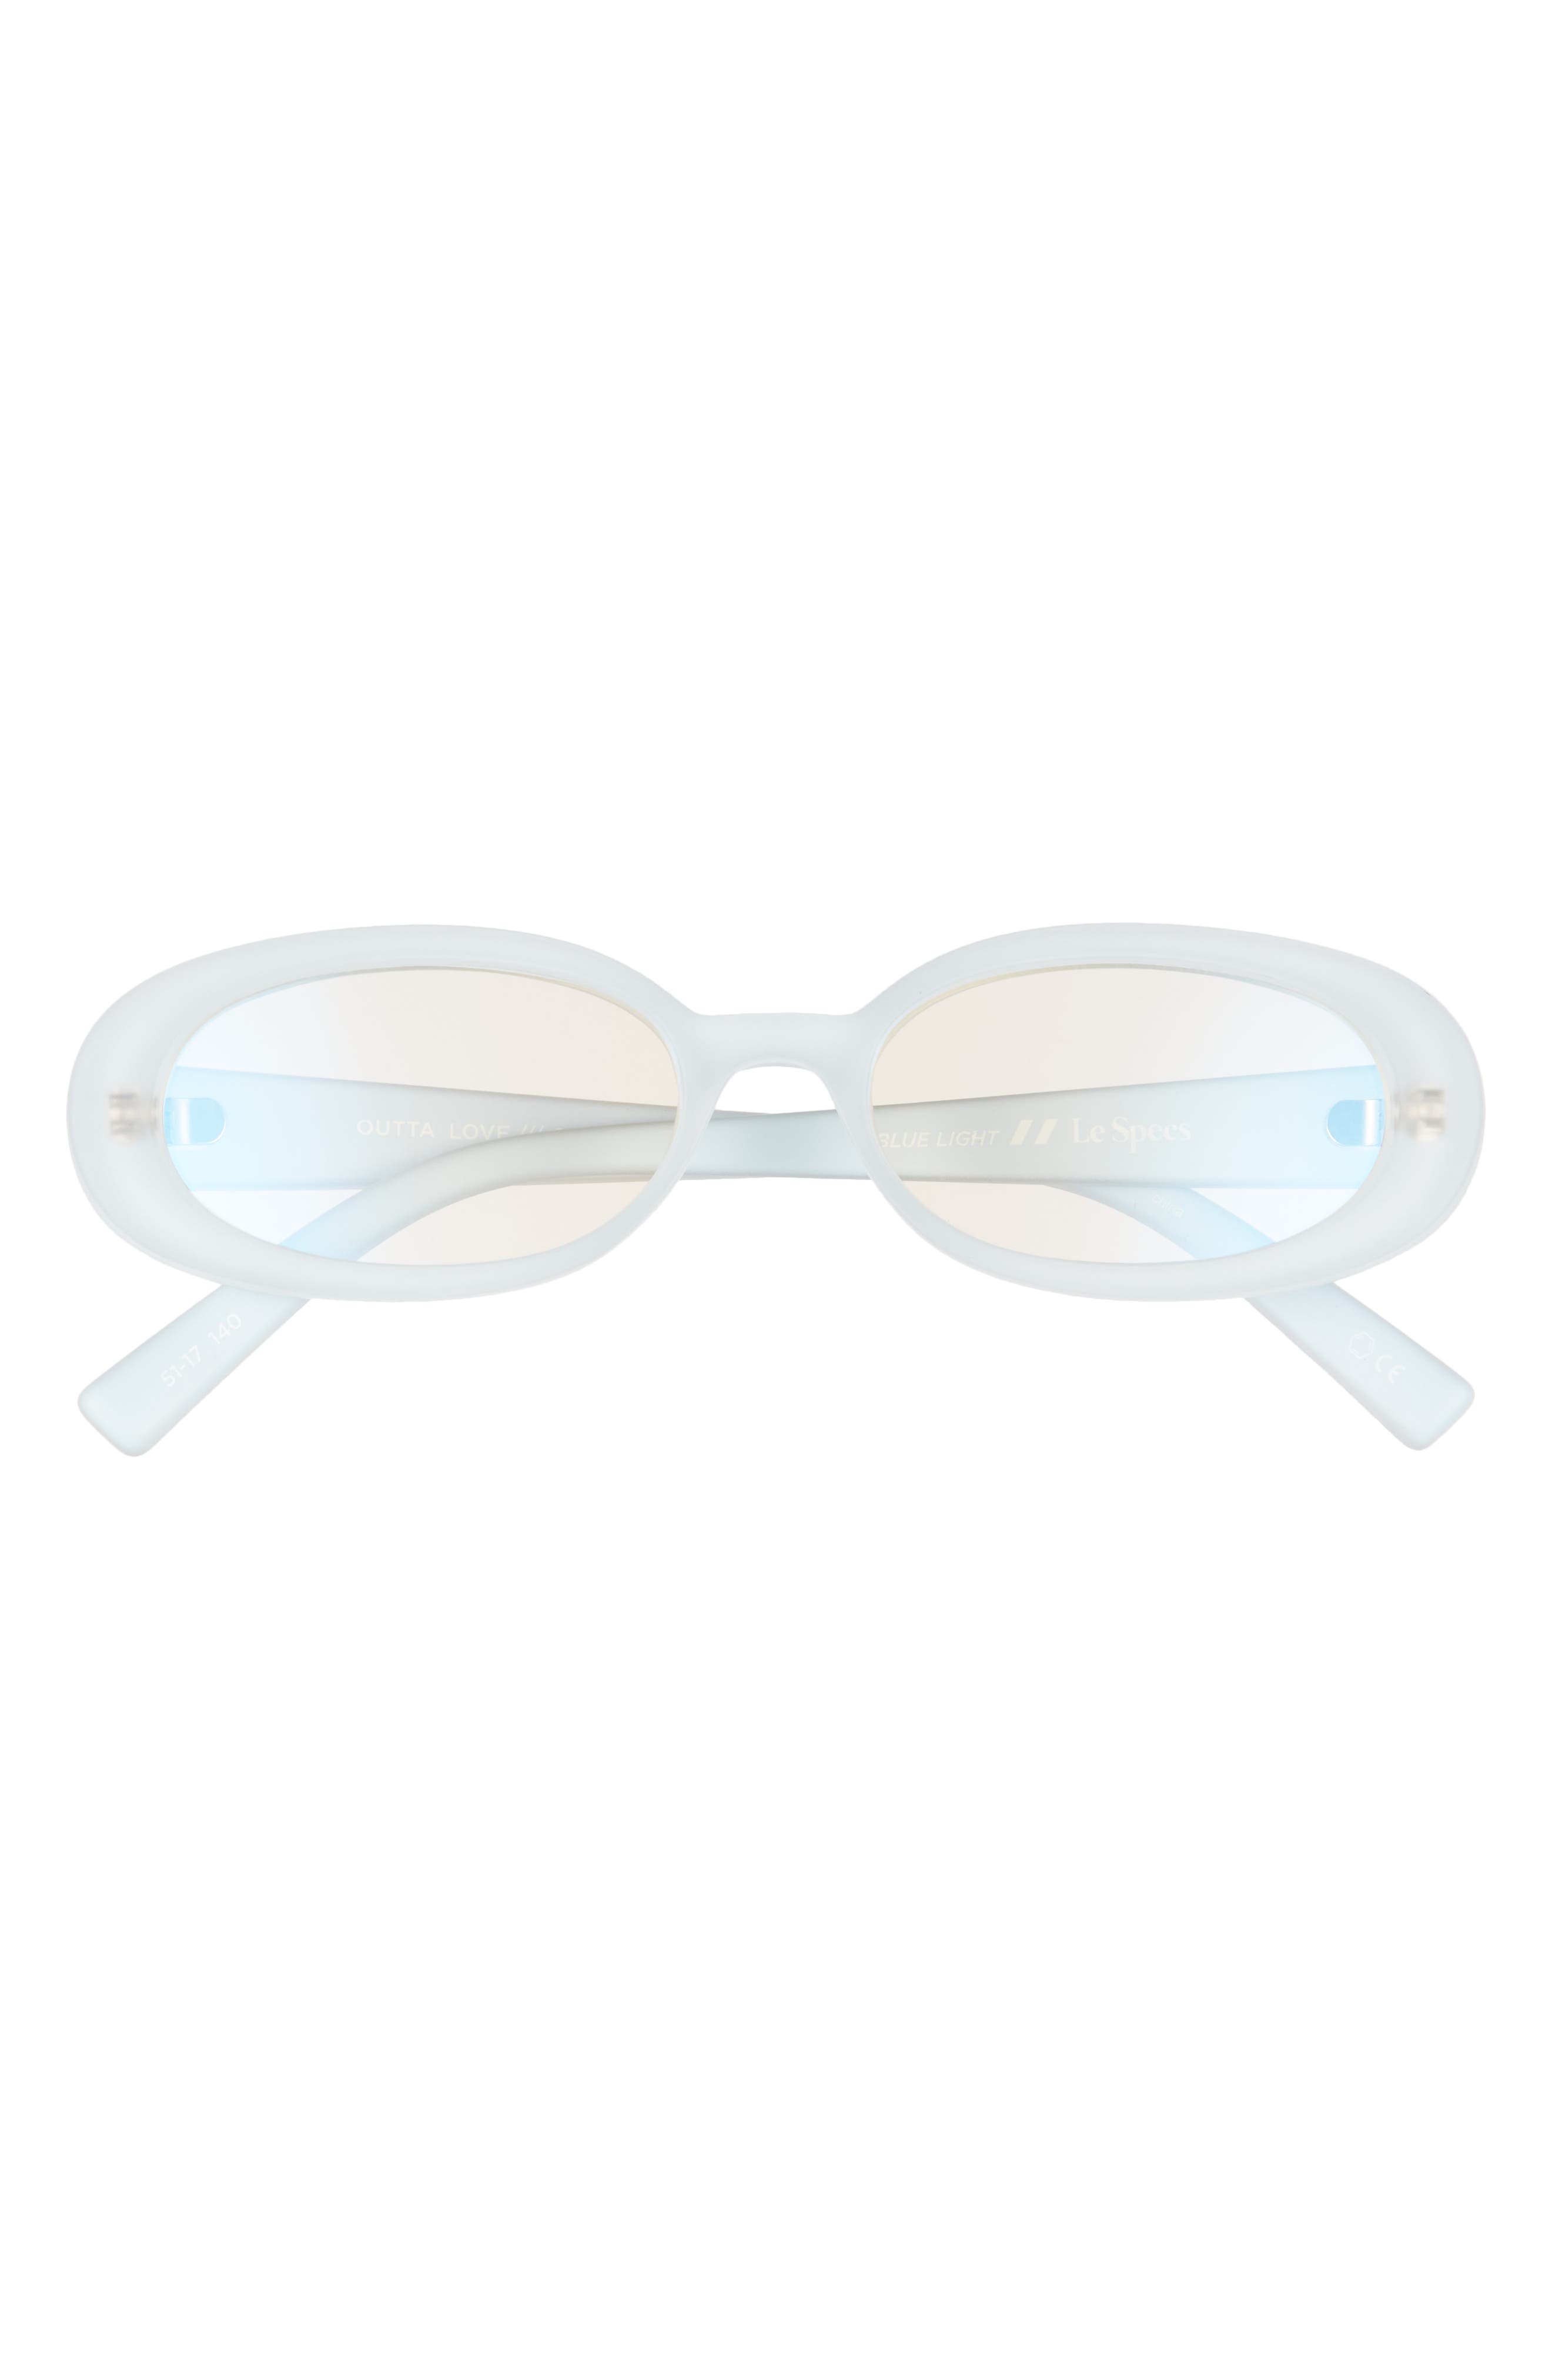 Le Specs Outta Love 45mm Small Blue Light Blocking Glasses in Powder Blue/Anti Blue Light at Nordstrom